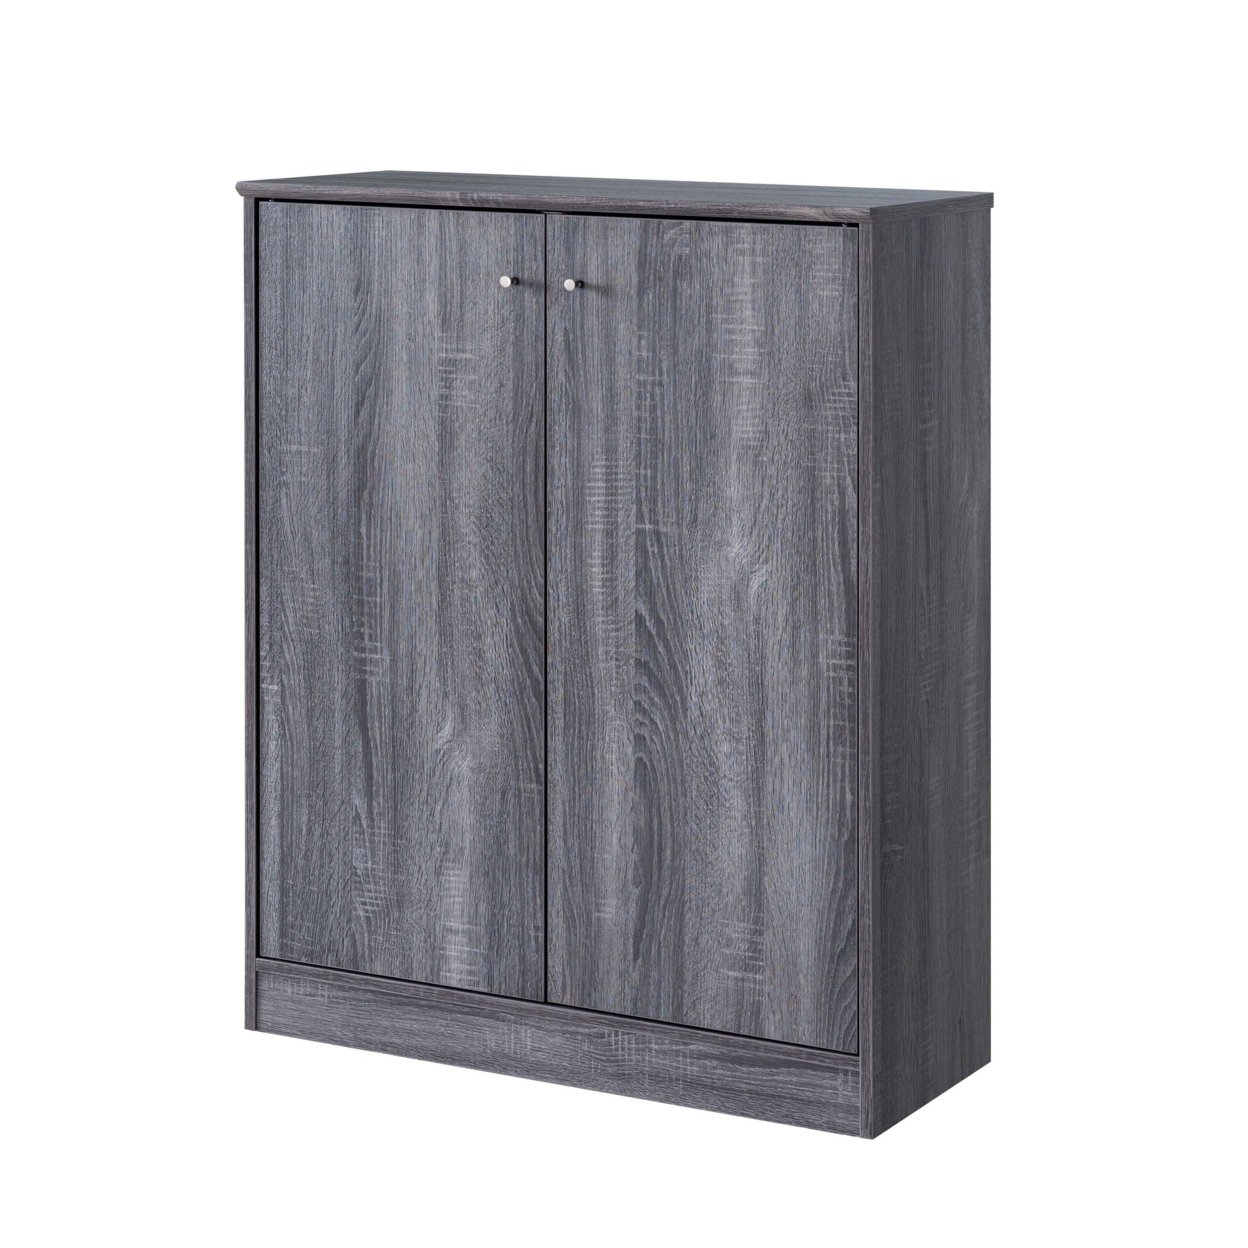 41 Inch Distressed Wooden Shoe Cabinet With 2 Drawers, Gray- Saltoro Sherpi